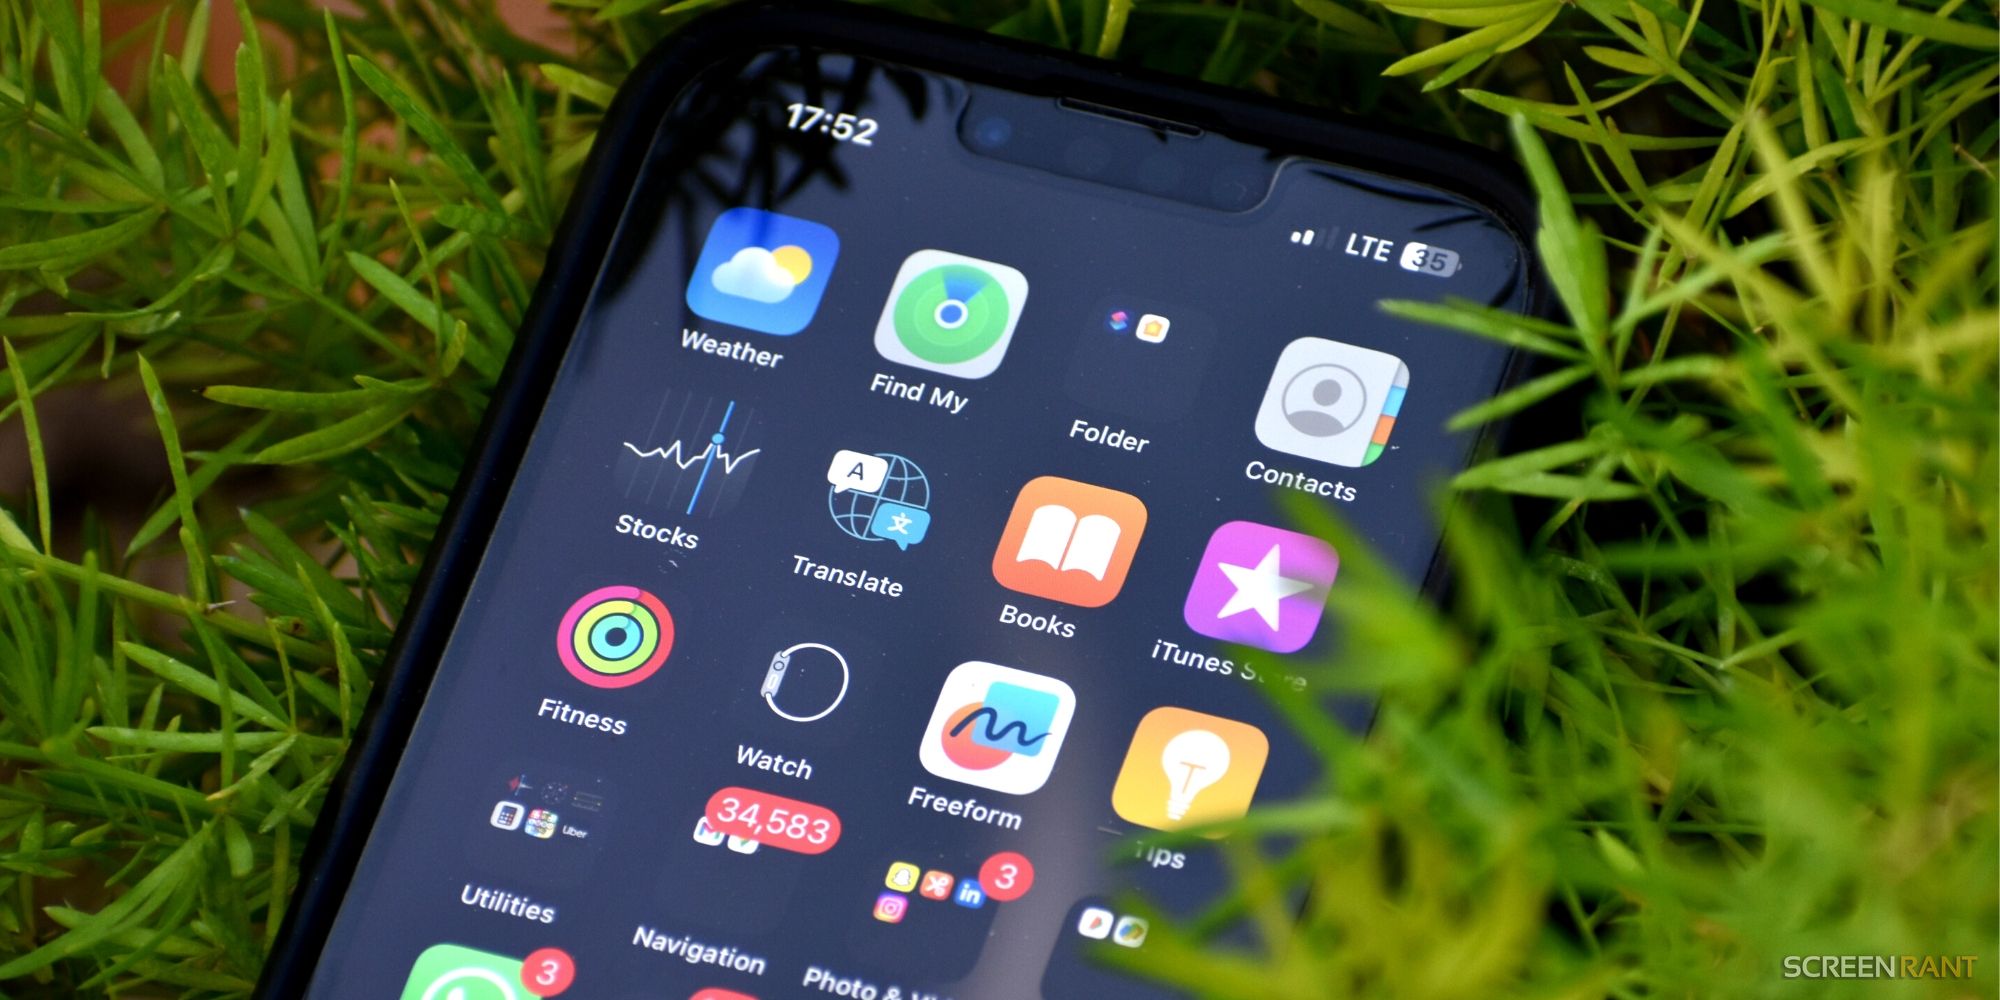 Image of the iPhone's home screen with multiple apps on a dark background